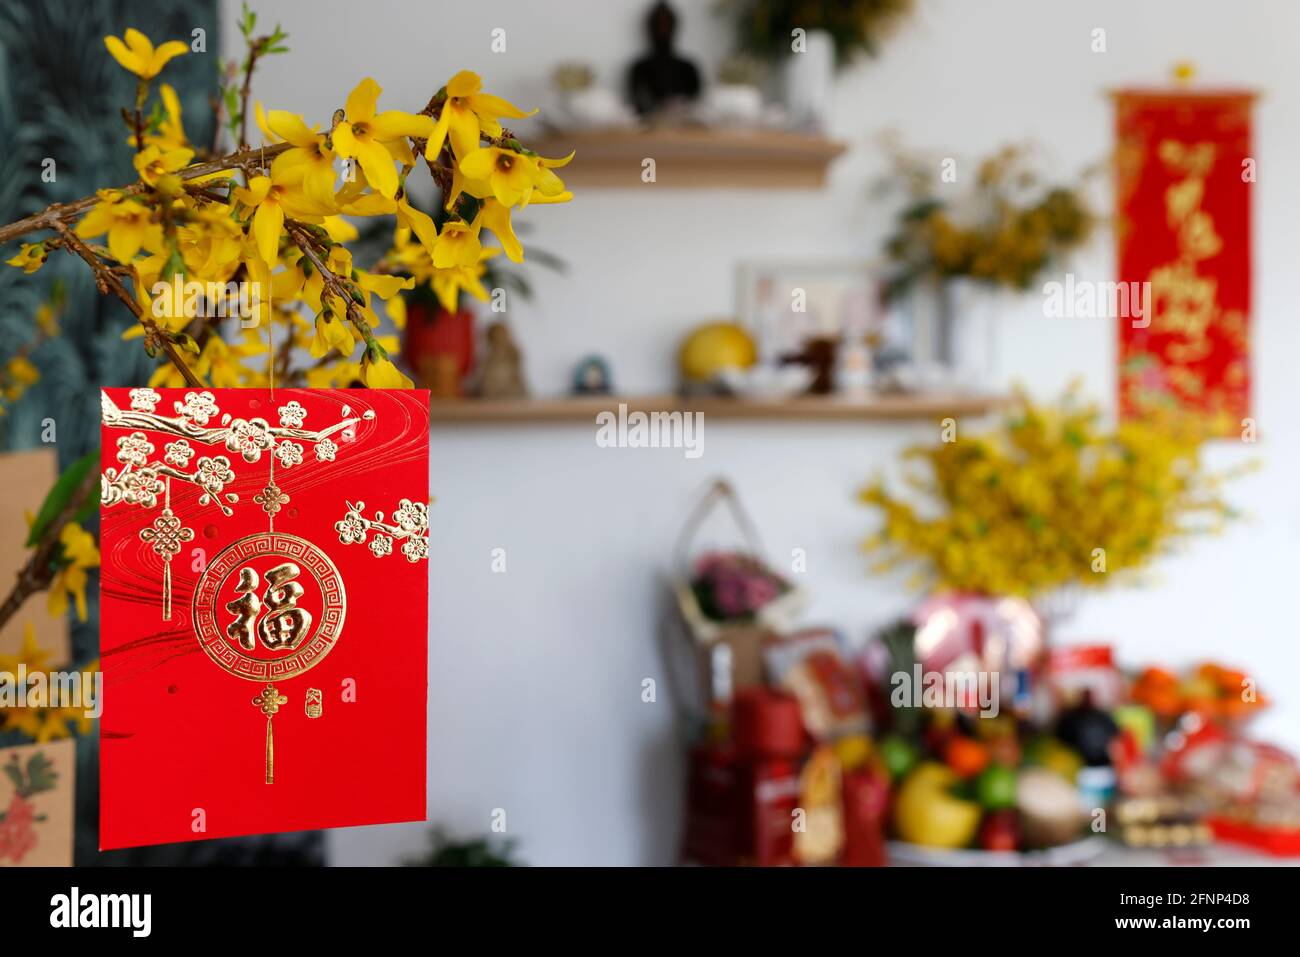 Red envelopes ( hongbao ) for Chinese and Vietnamese New Year. Red color is  a symbol of good luck. Saint Pierre en Faucigny. France Stock Photo - Alamy